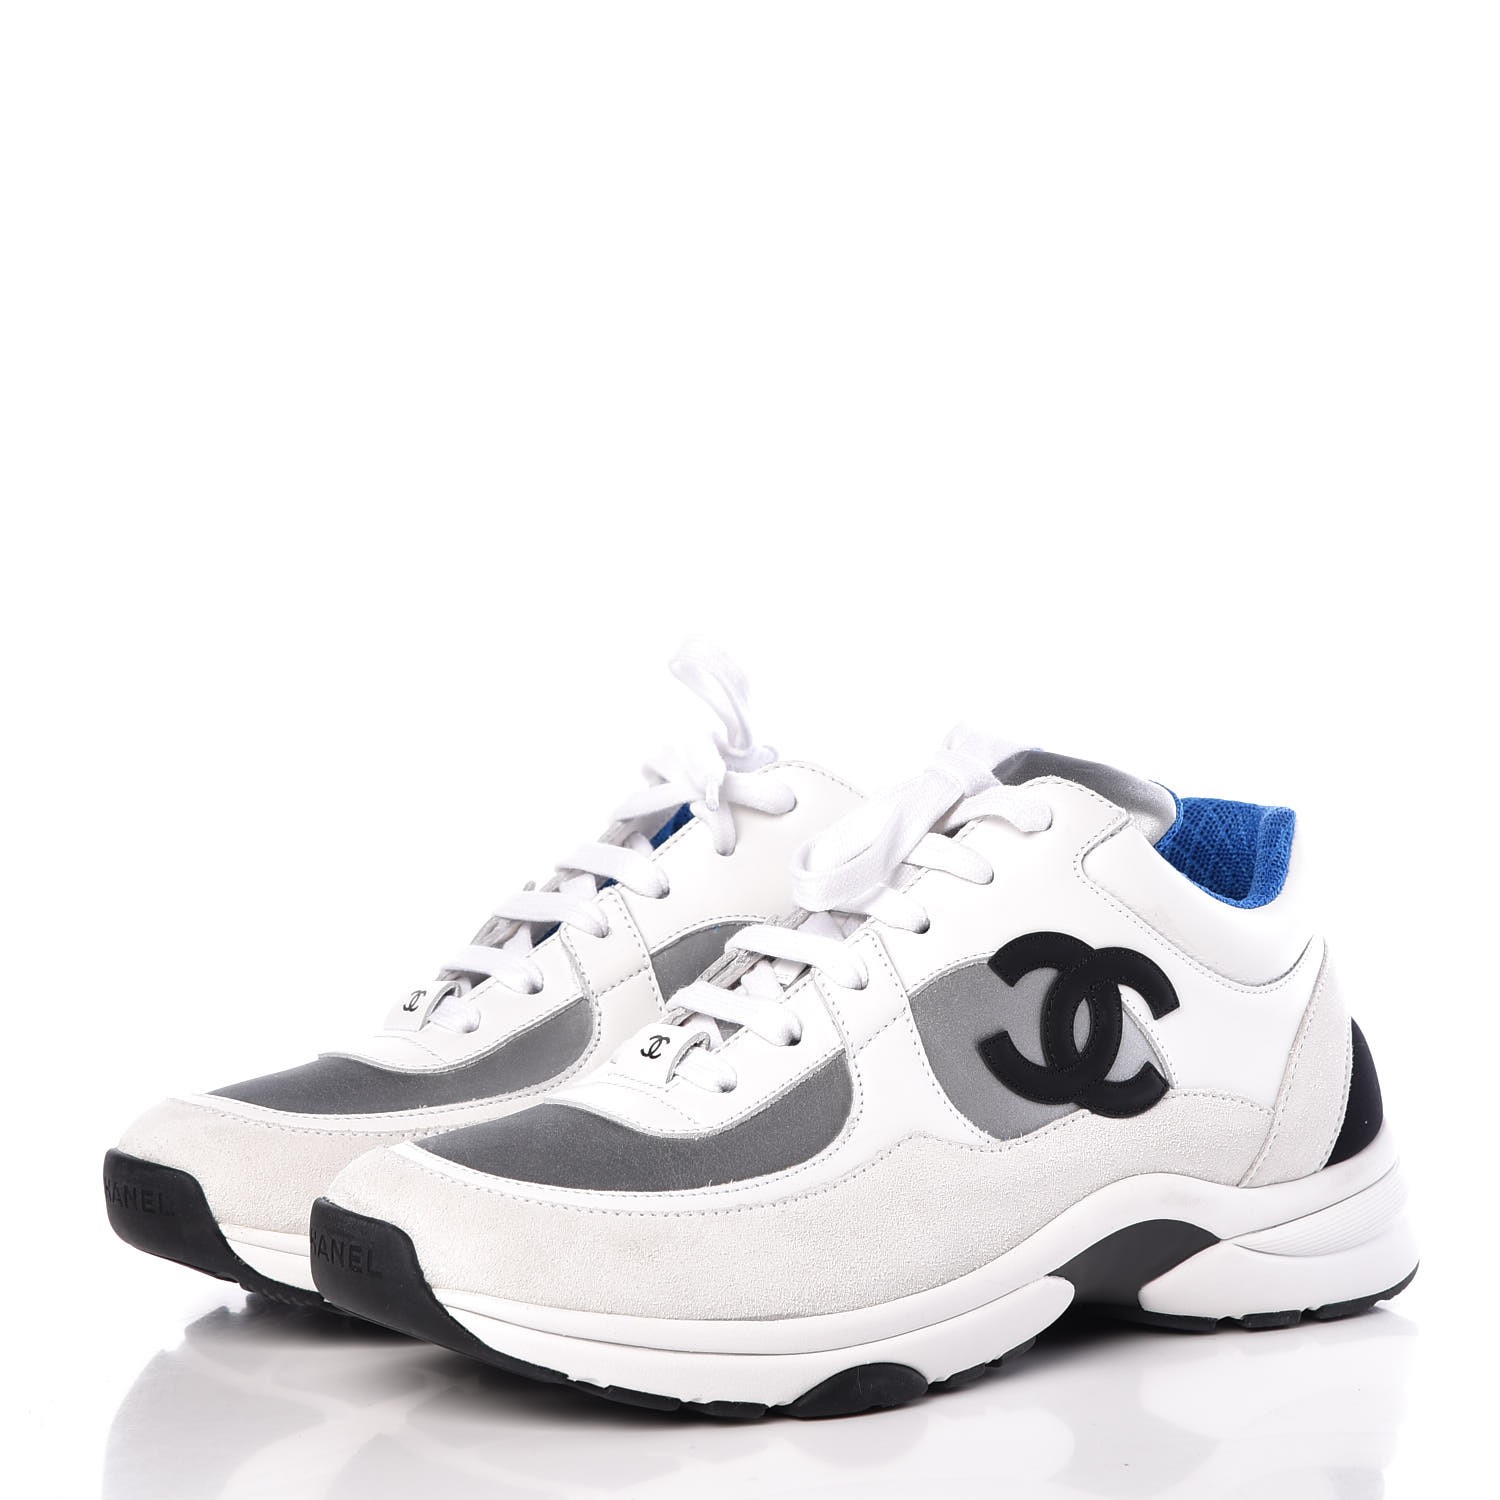 CHANEL Calfskin Fabric Sneakers 38.5 White Silver Fluo Blue 324632